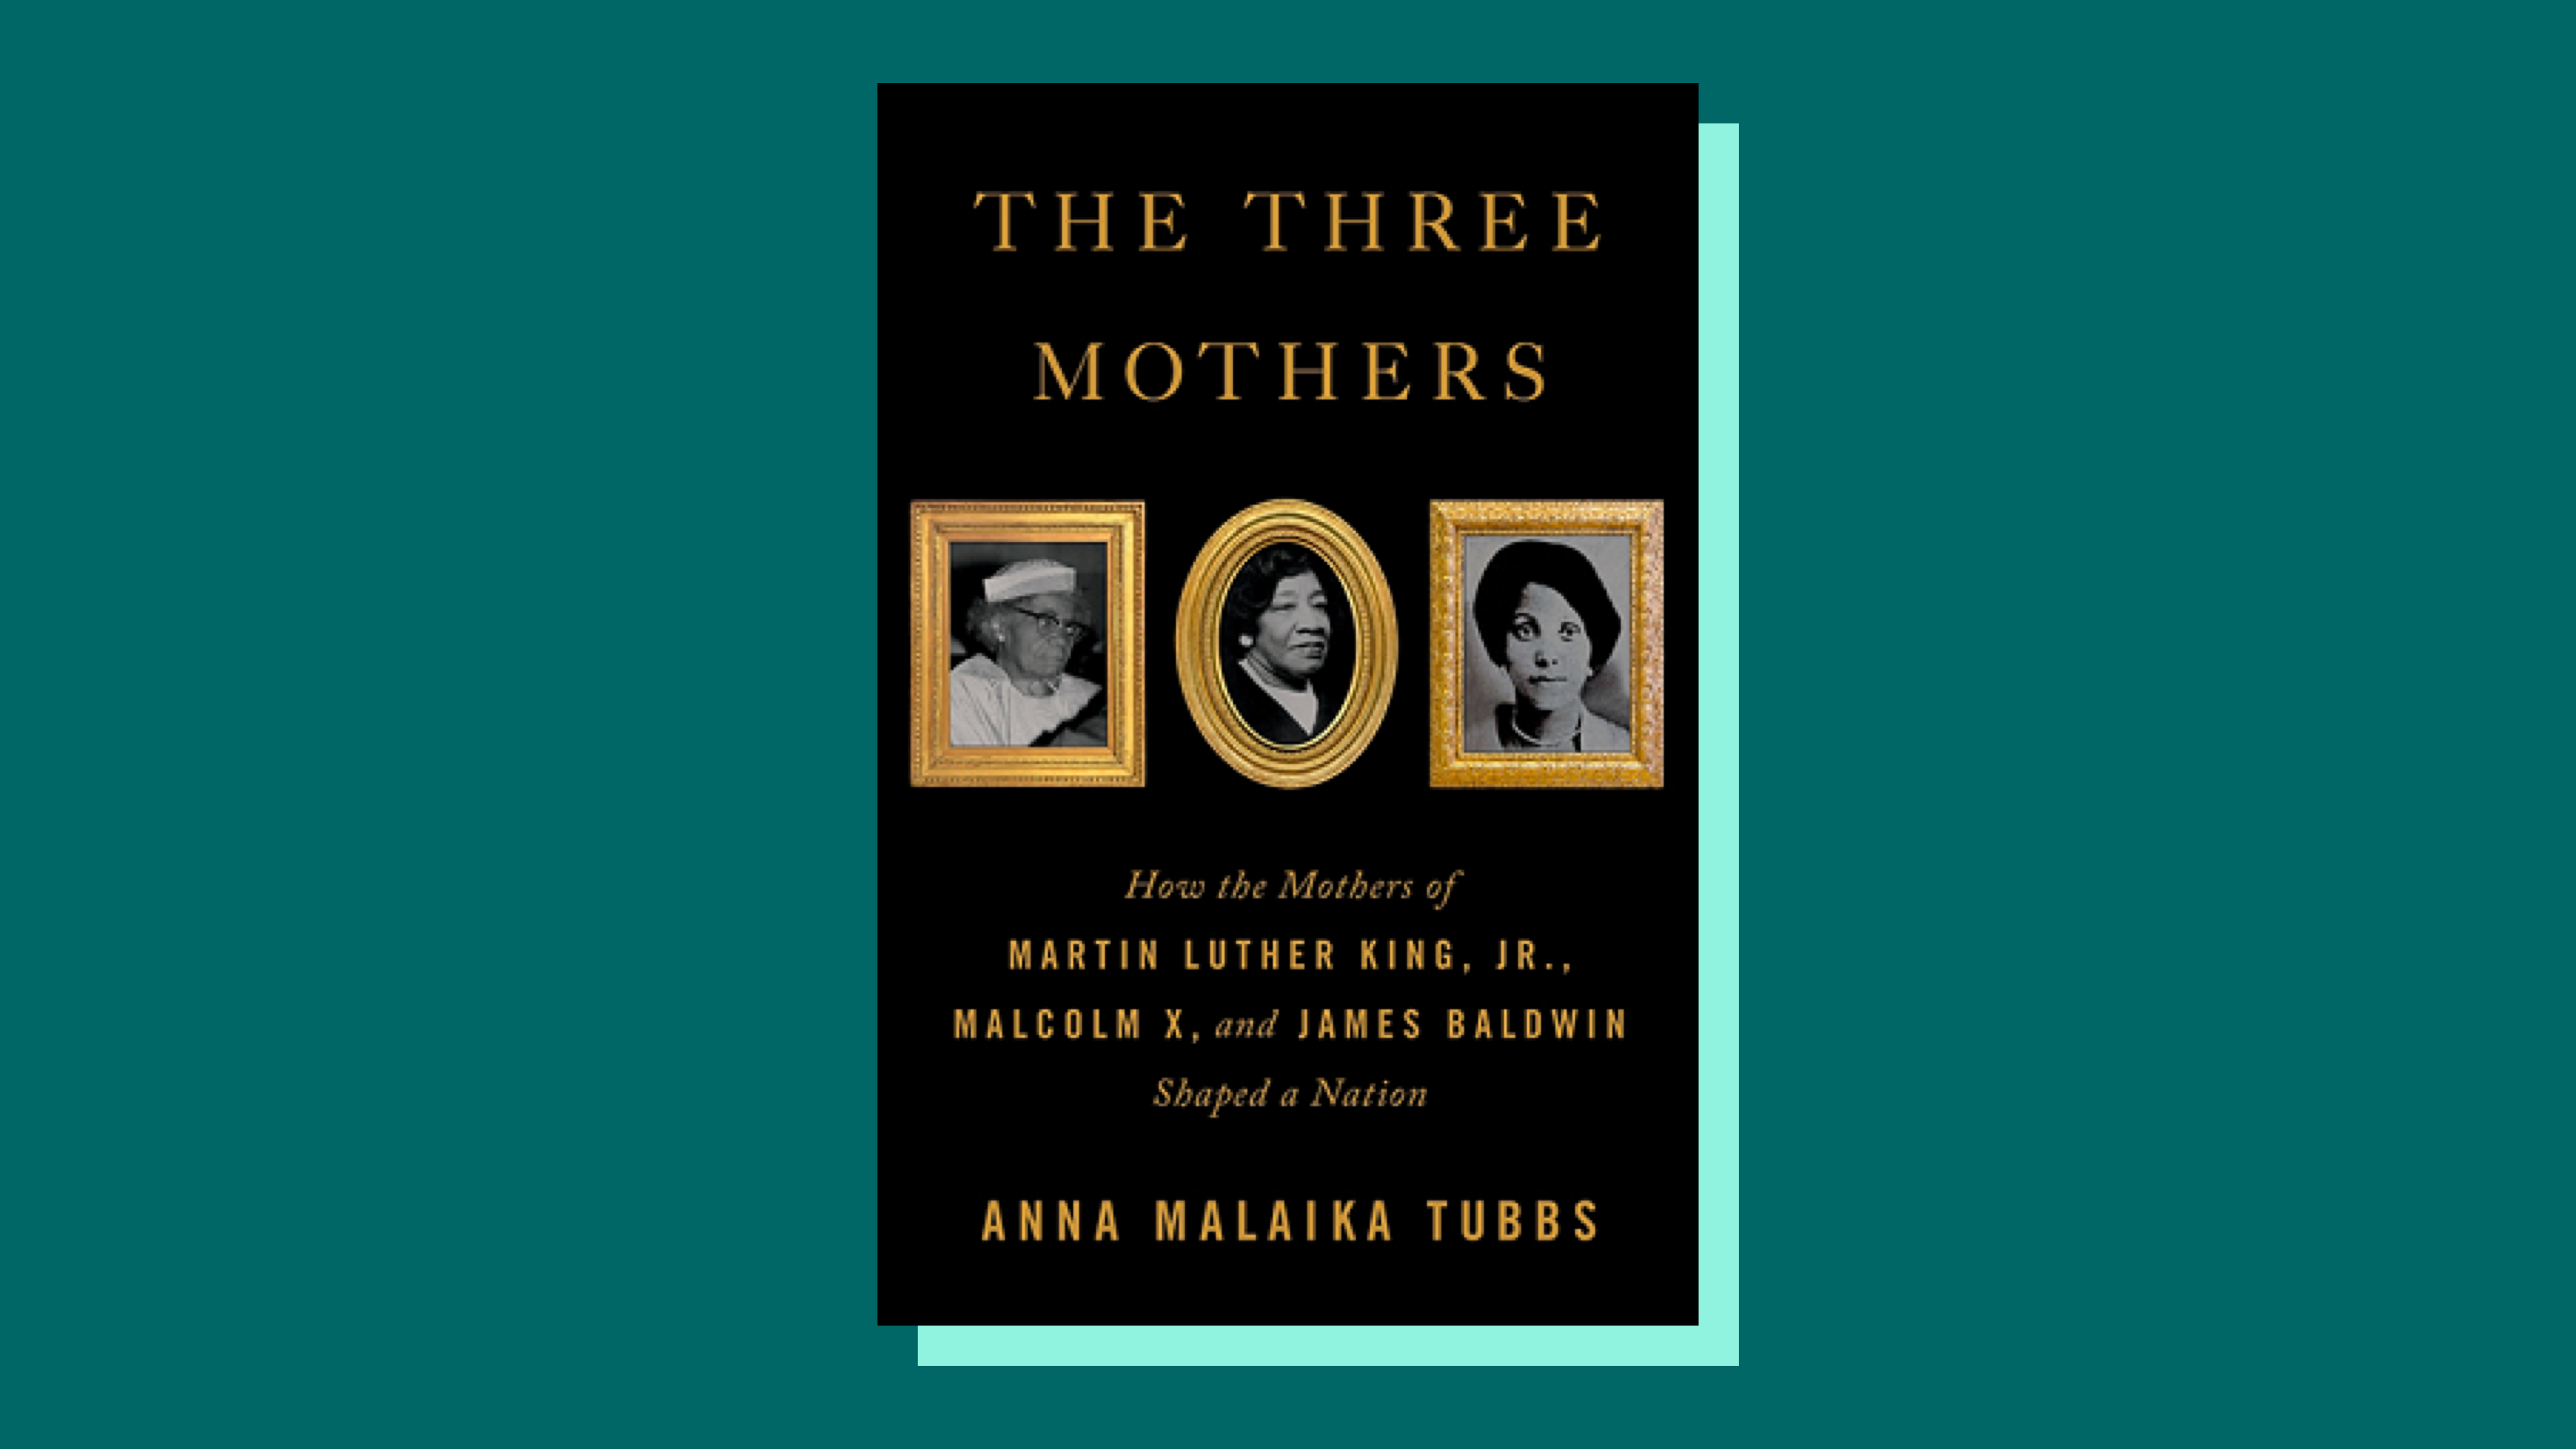 “The Three Mothers: How the Mothers of Martin Luther King Jr., Malcolm X, and James Baldwin Shaped a Nation” by Anna MalaikaTubbs 